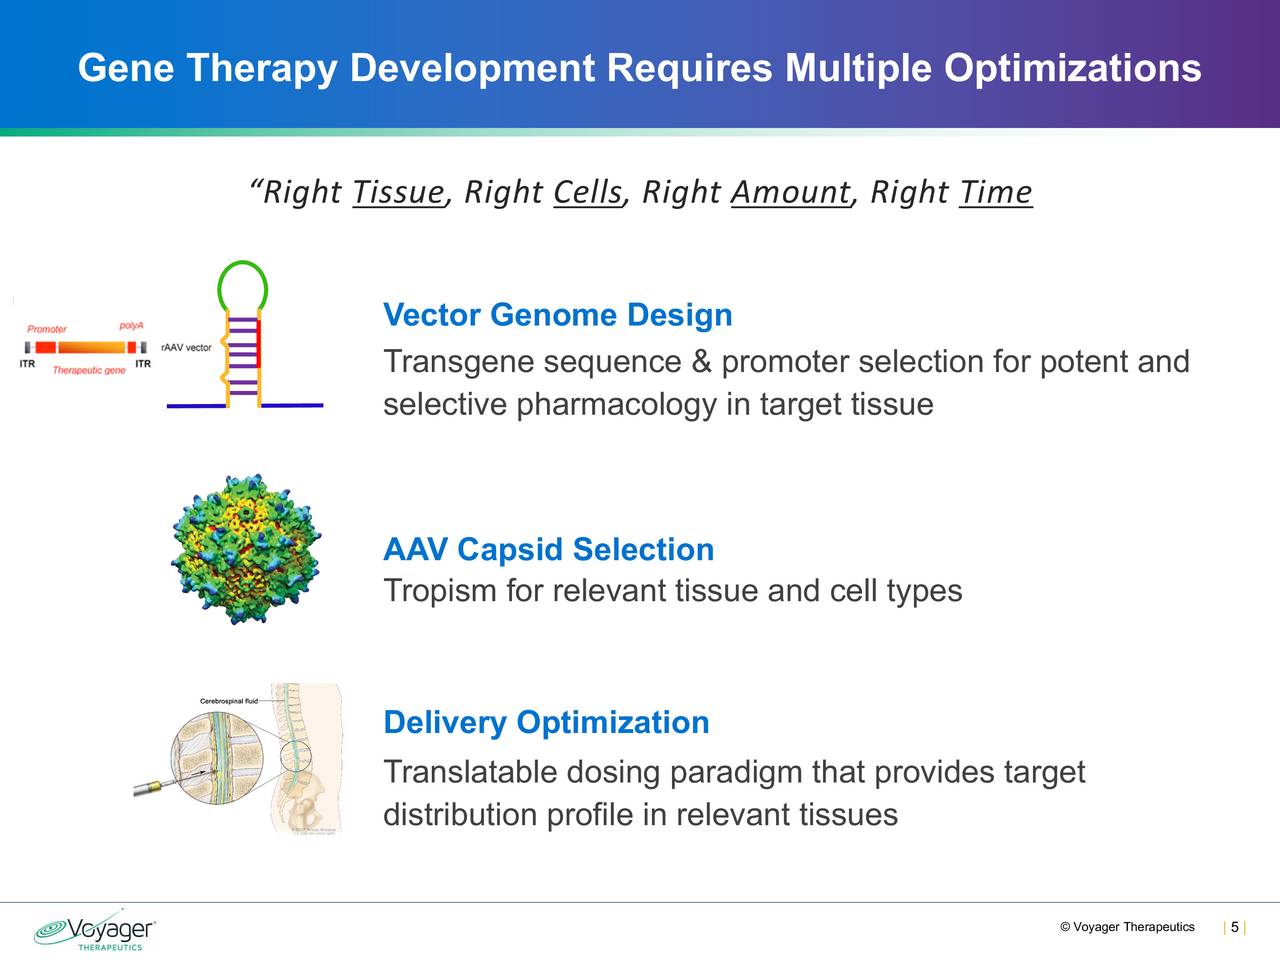 Gene Therapy Development Requires Multiple Optimizations